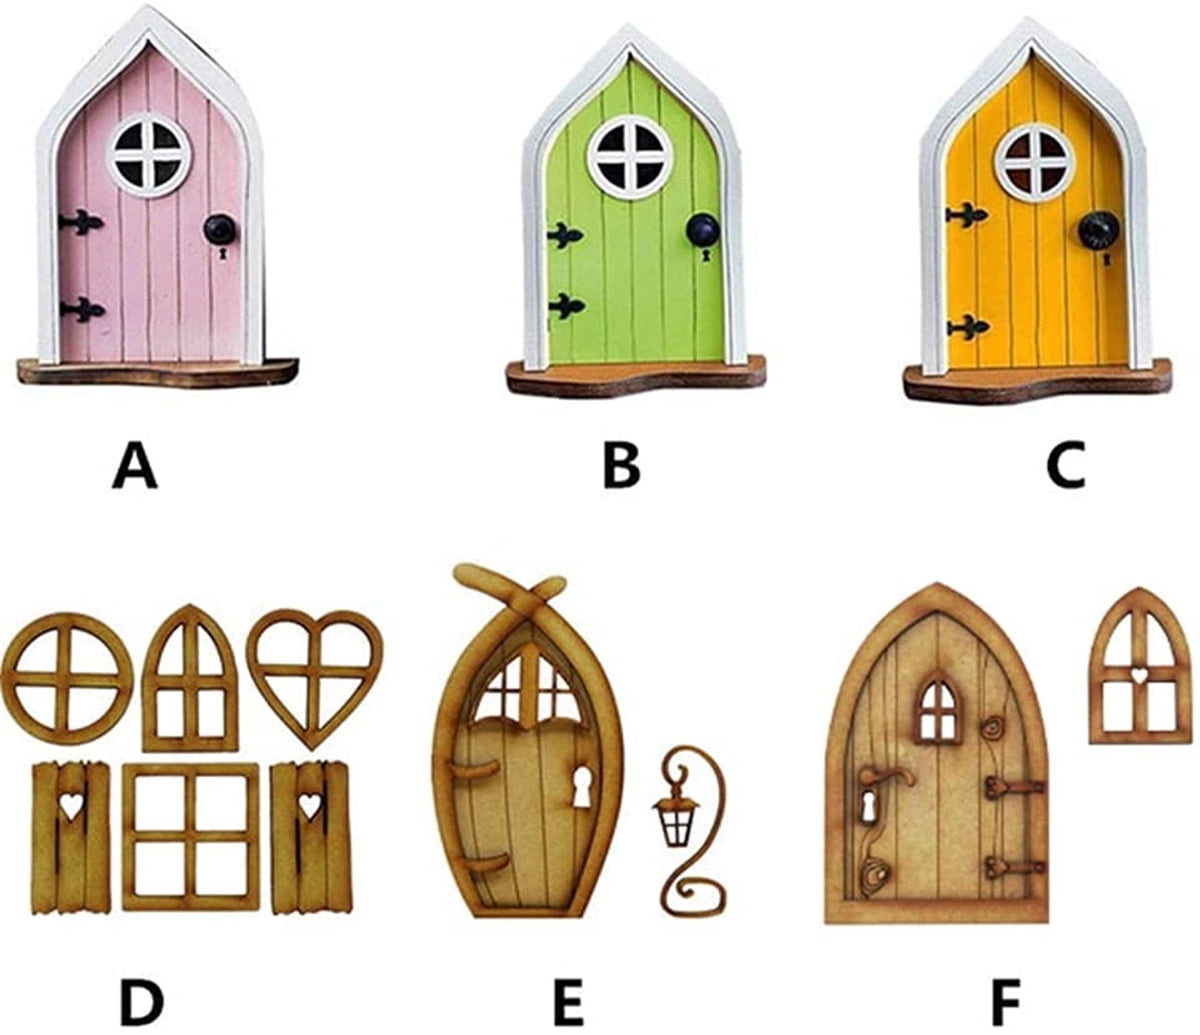 Miniature Fairy Gnome Home Window and Door for Trees Yard Art Garden Sculpture Decoration YUGHGH Wooden Playhouse Decoration Door for Self-Assembly Door Gnome Door Set Garden Decoration Doors